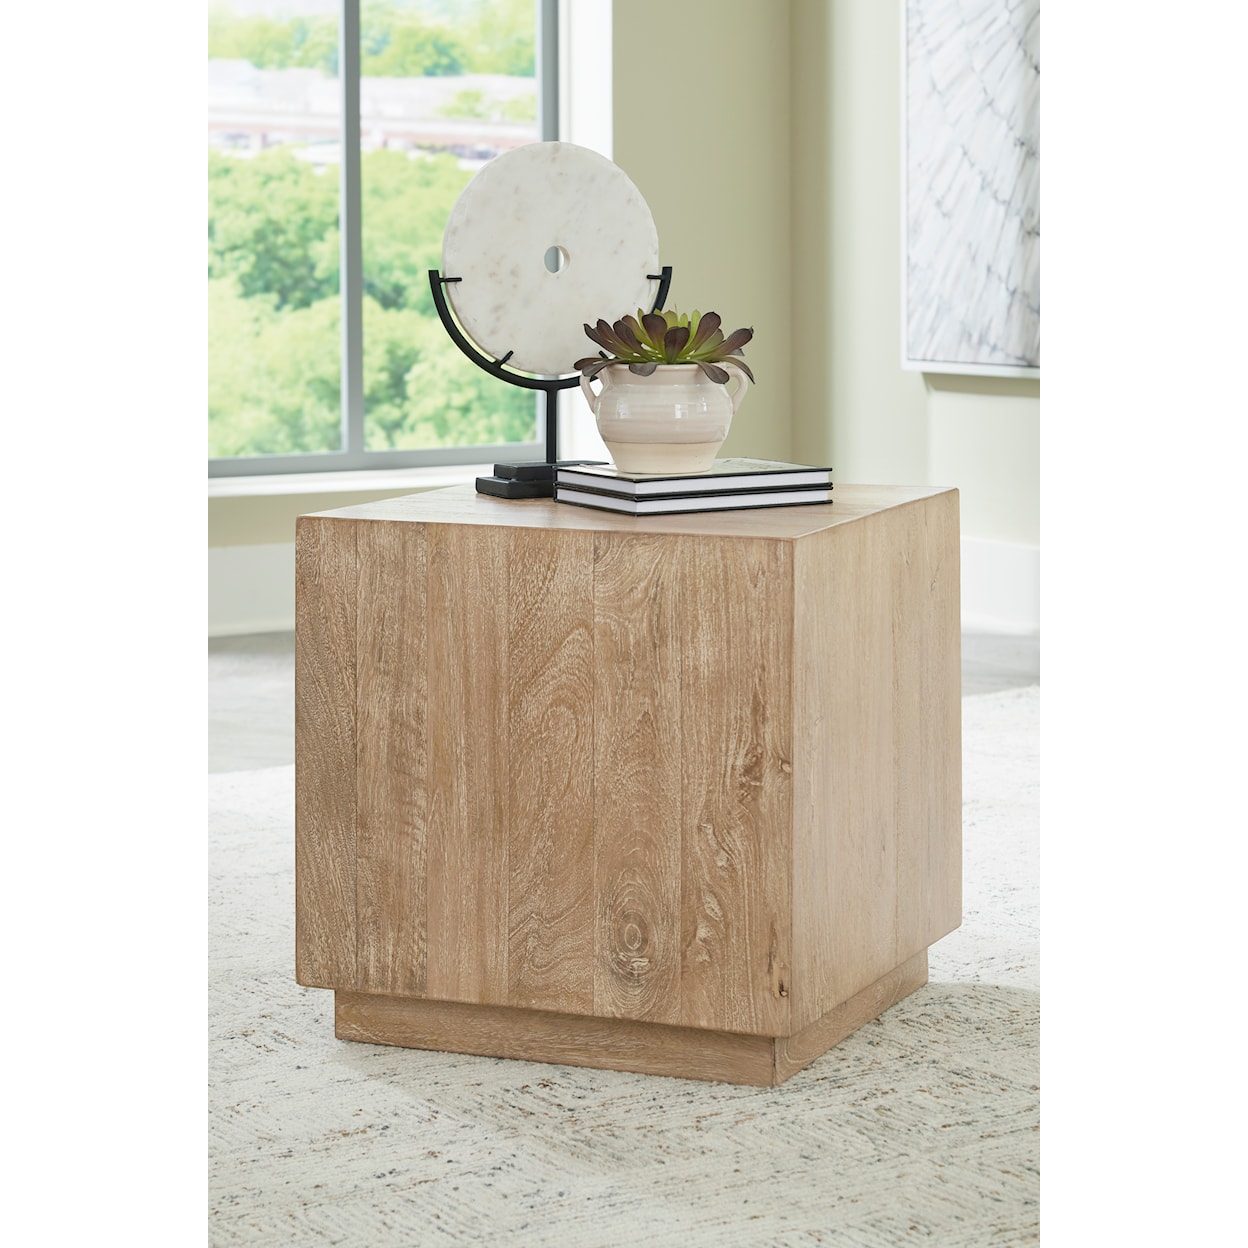 Signature Design by Ashley Belenburg Accent Table